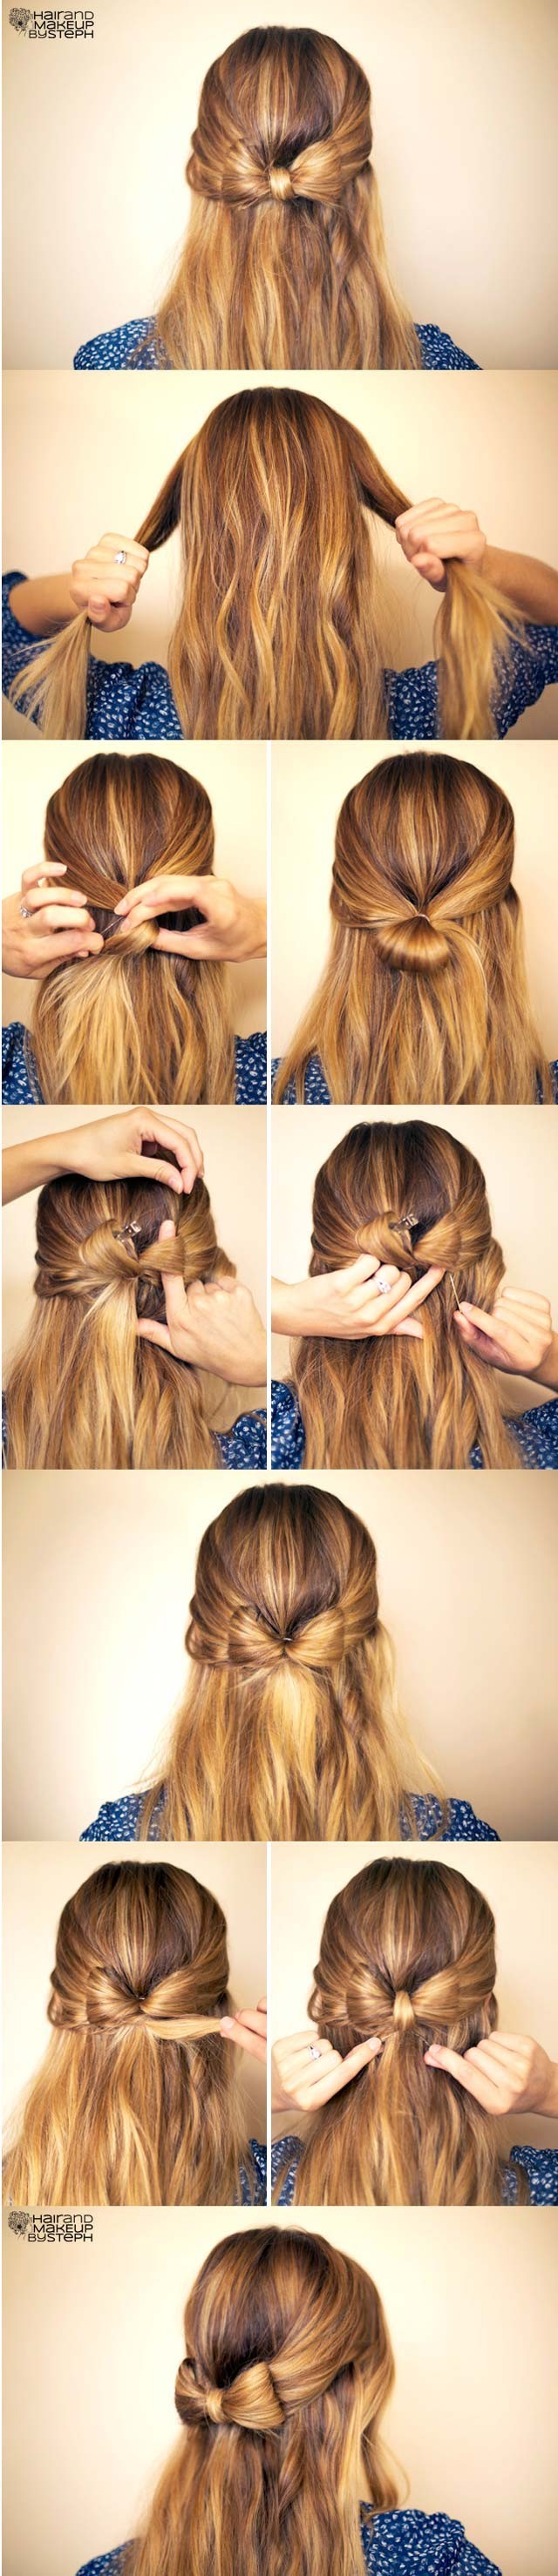 Cute Easy Hairstyle